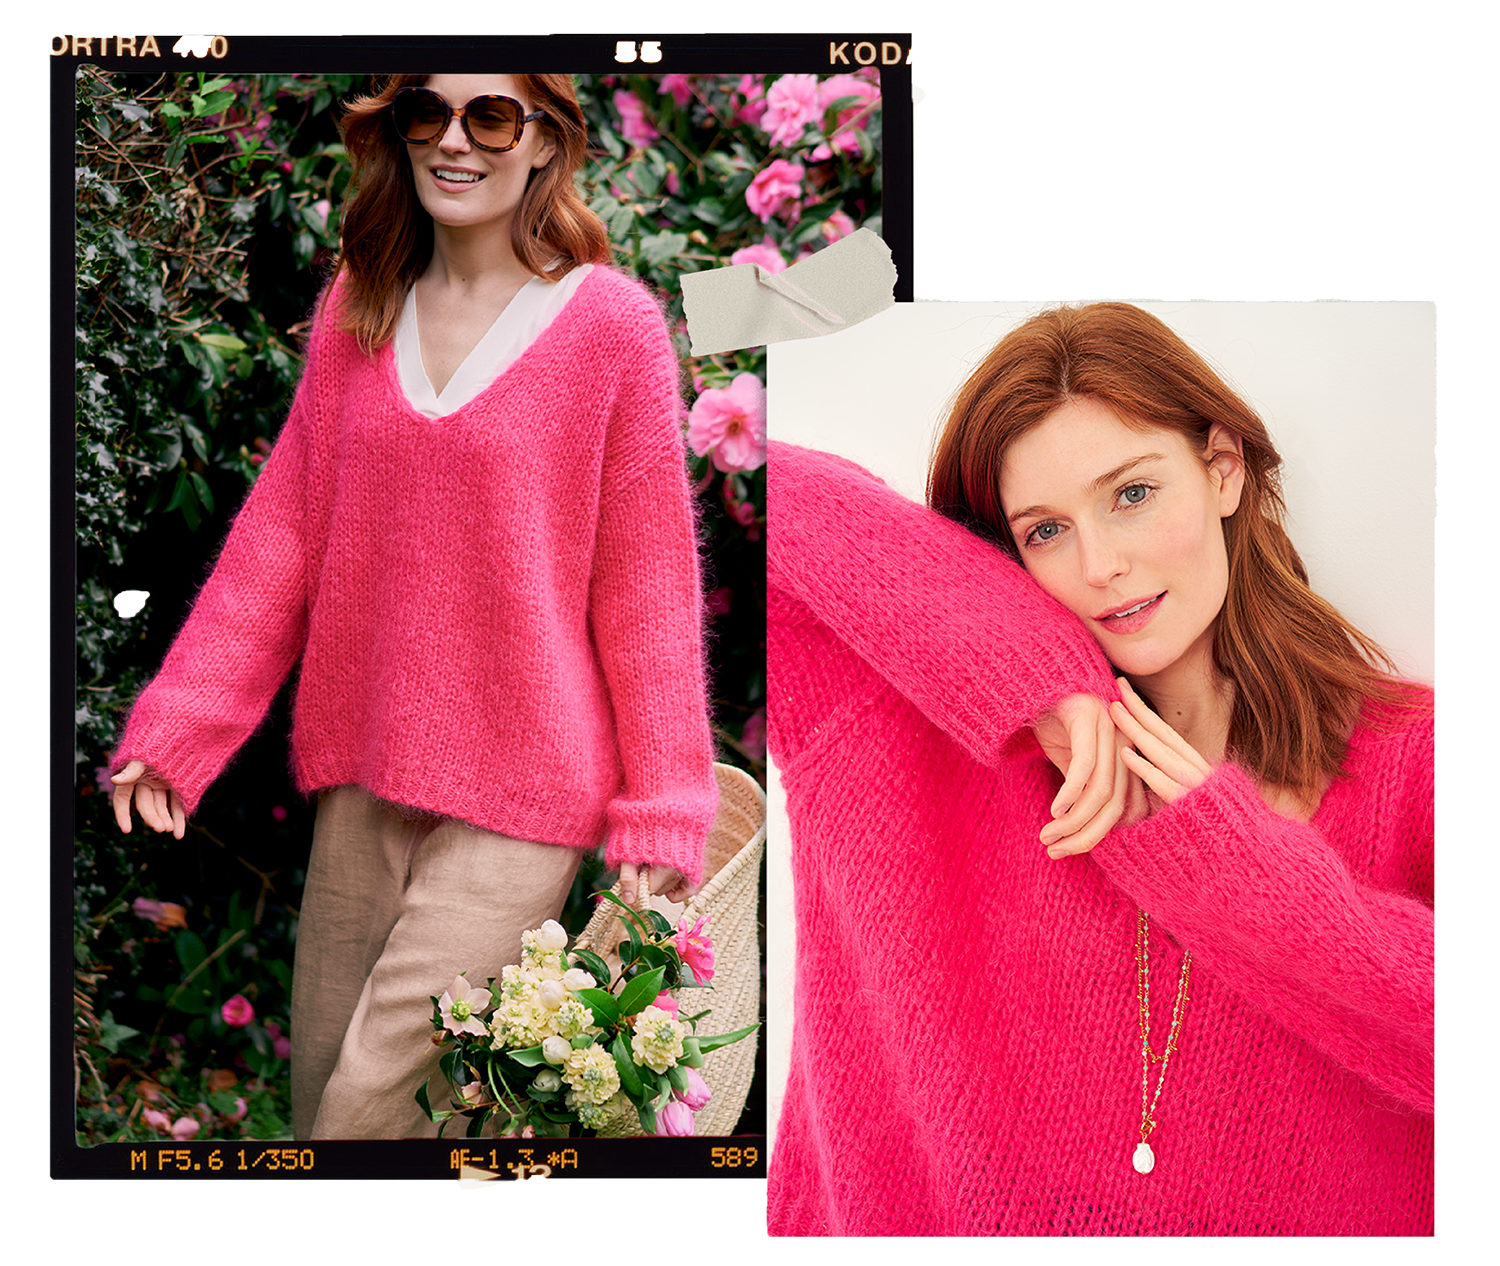 A model wearing a bright pink knitted v neck jumper over a white top walking in front of a green bush with pink flowers wearing sunglasses aand holding a raffia basket with a bouquet in it